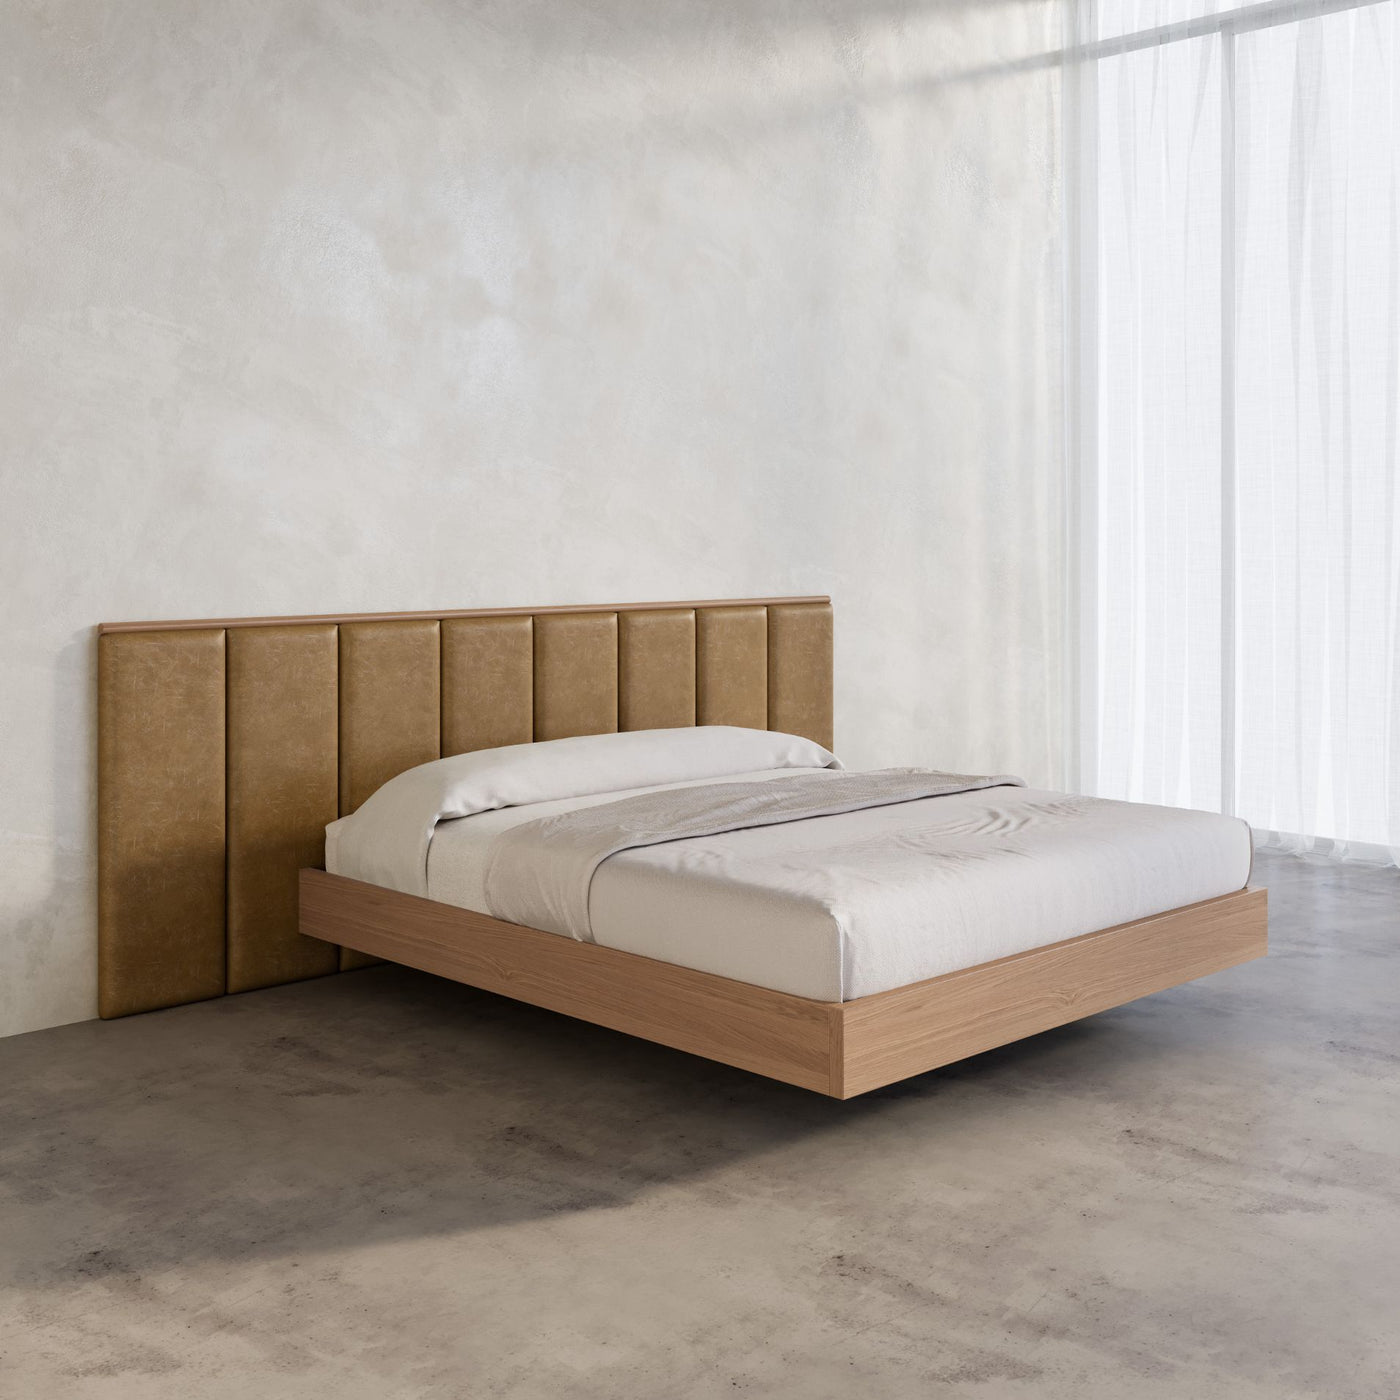 Leather bed frame with timber floating bed base in a large micro cement walled bedroom